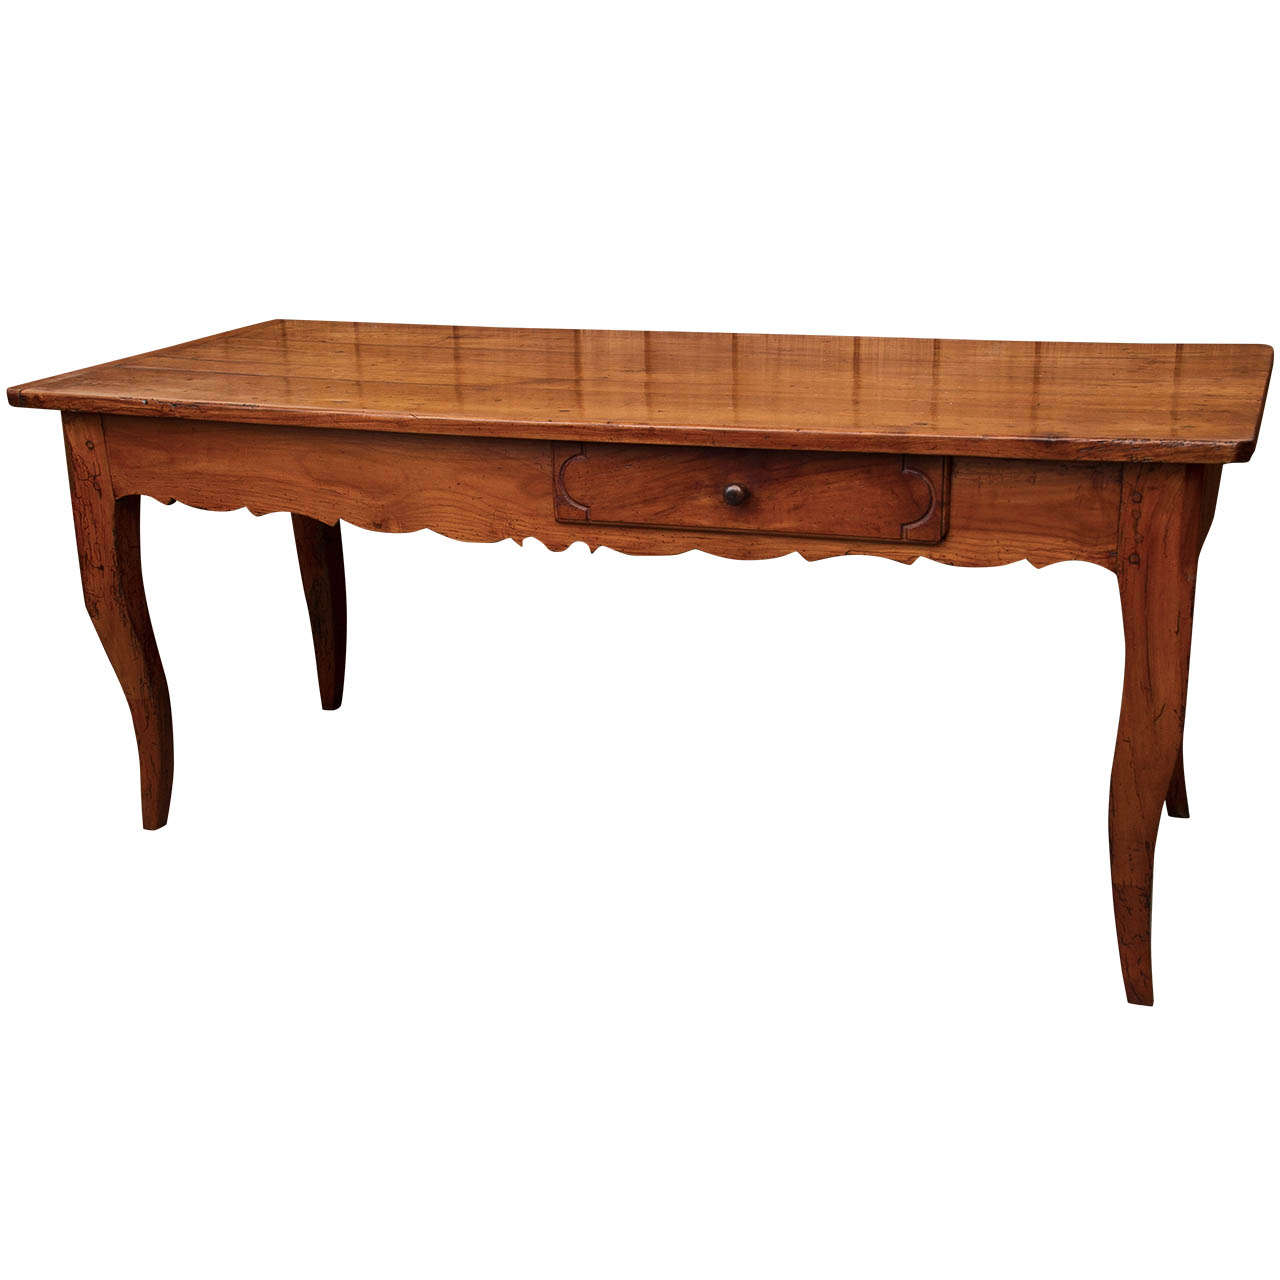 French Fruitwood Work Table